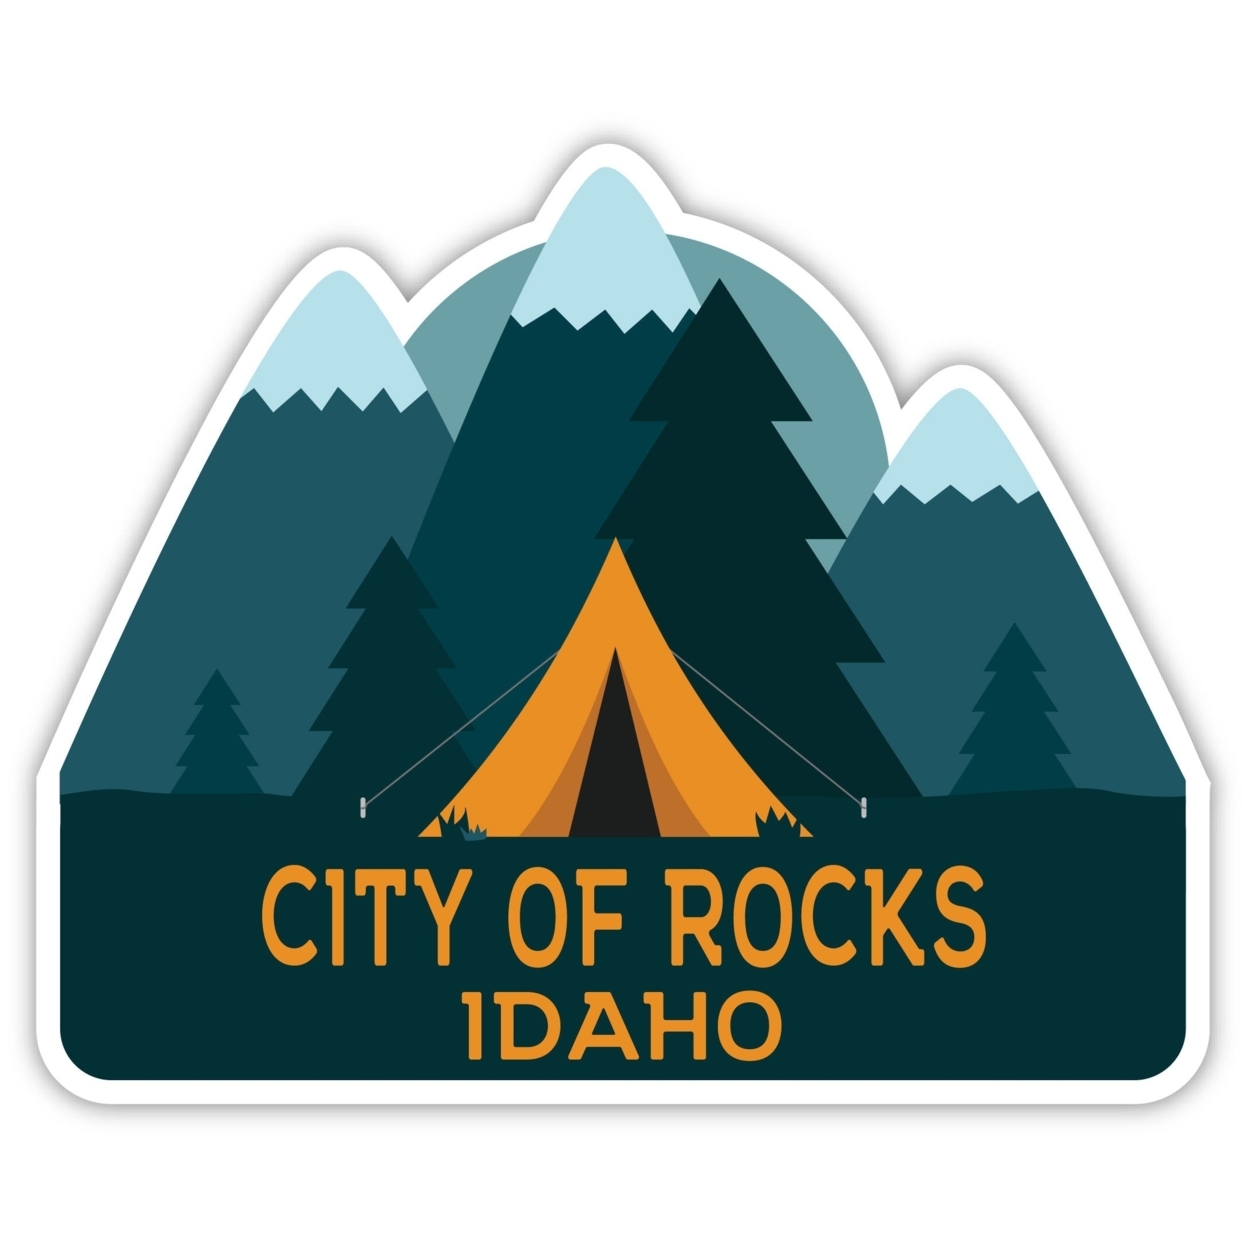 City Of Rocks Idaho Souvenir Decorative Stickers (Choose Theme And Size) - 4-Pack, 4-Inch, Great Outdoors